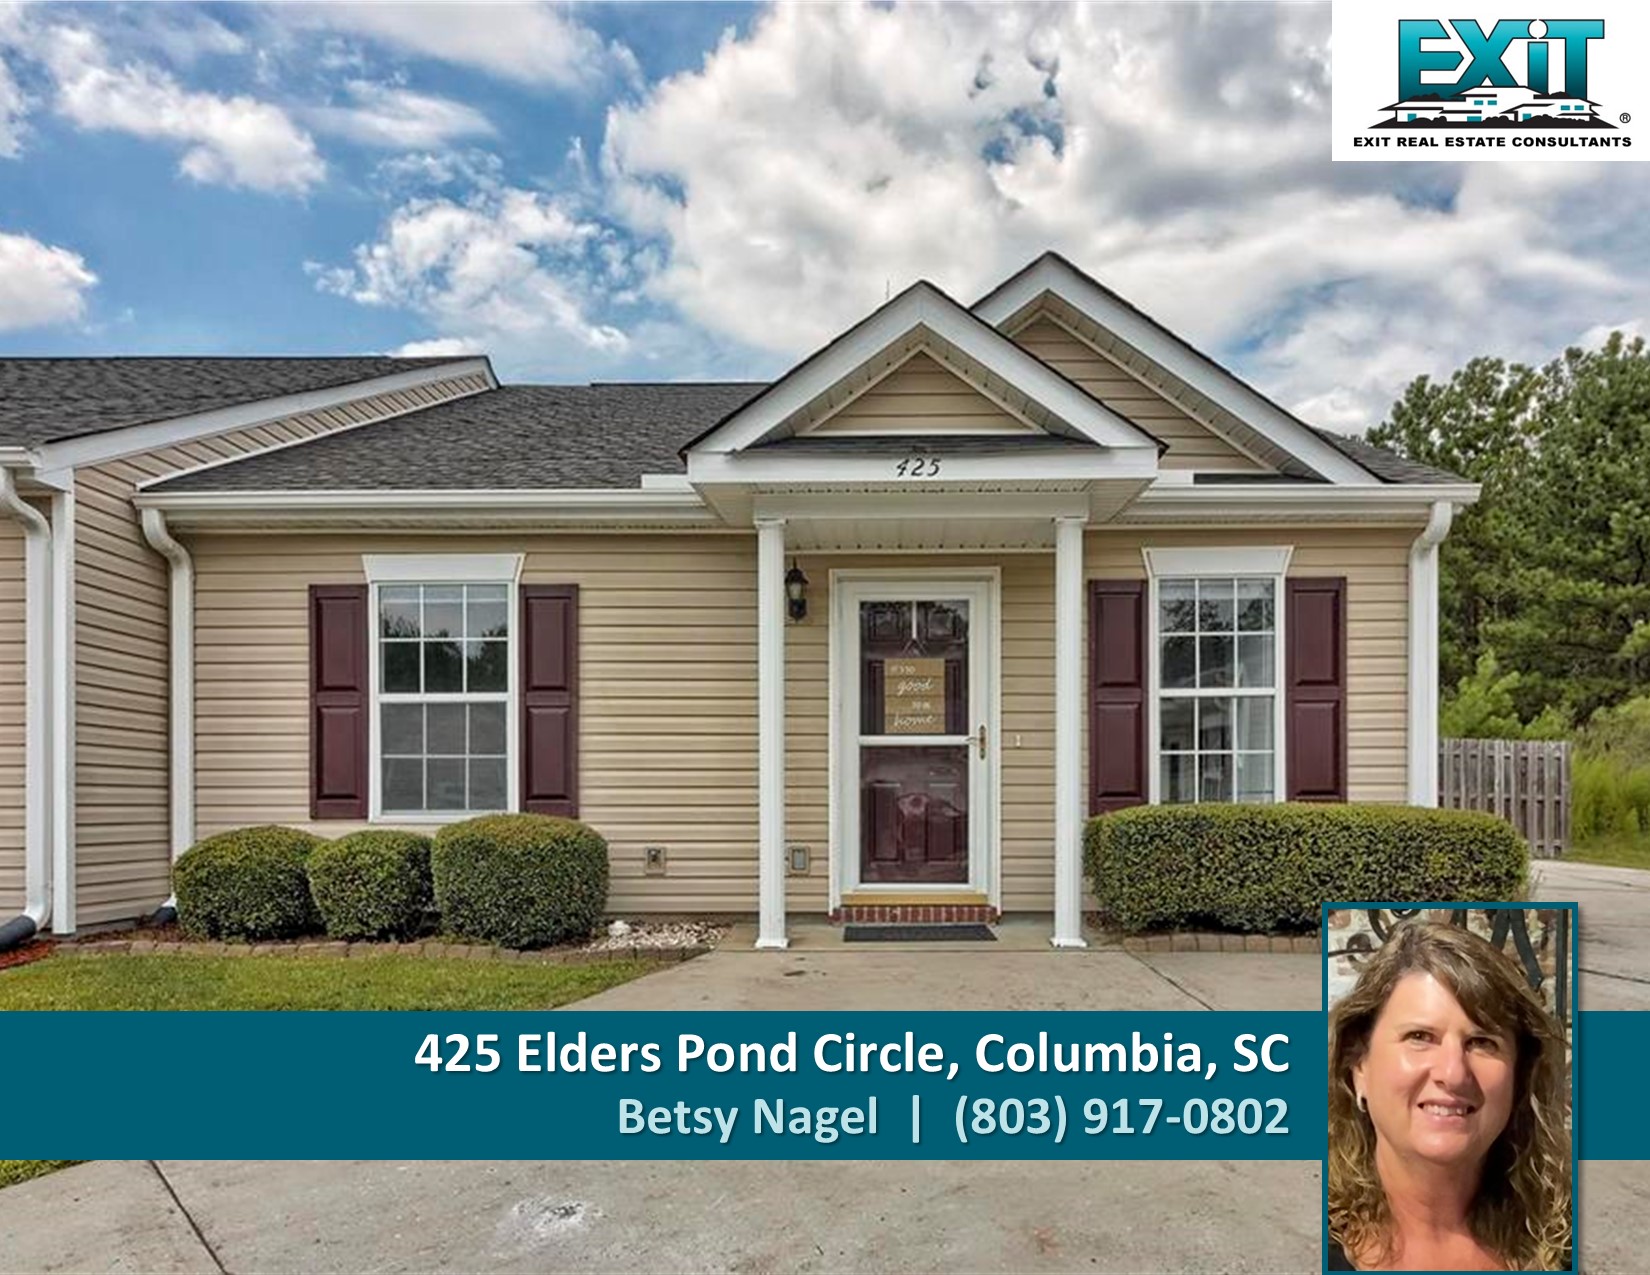 Just listed in Elders Pond